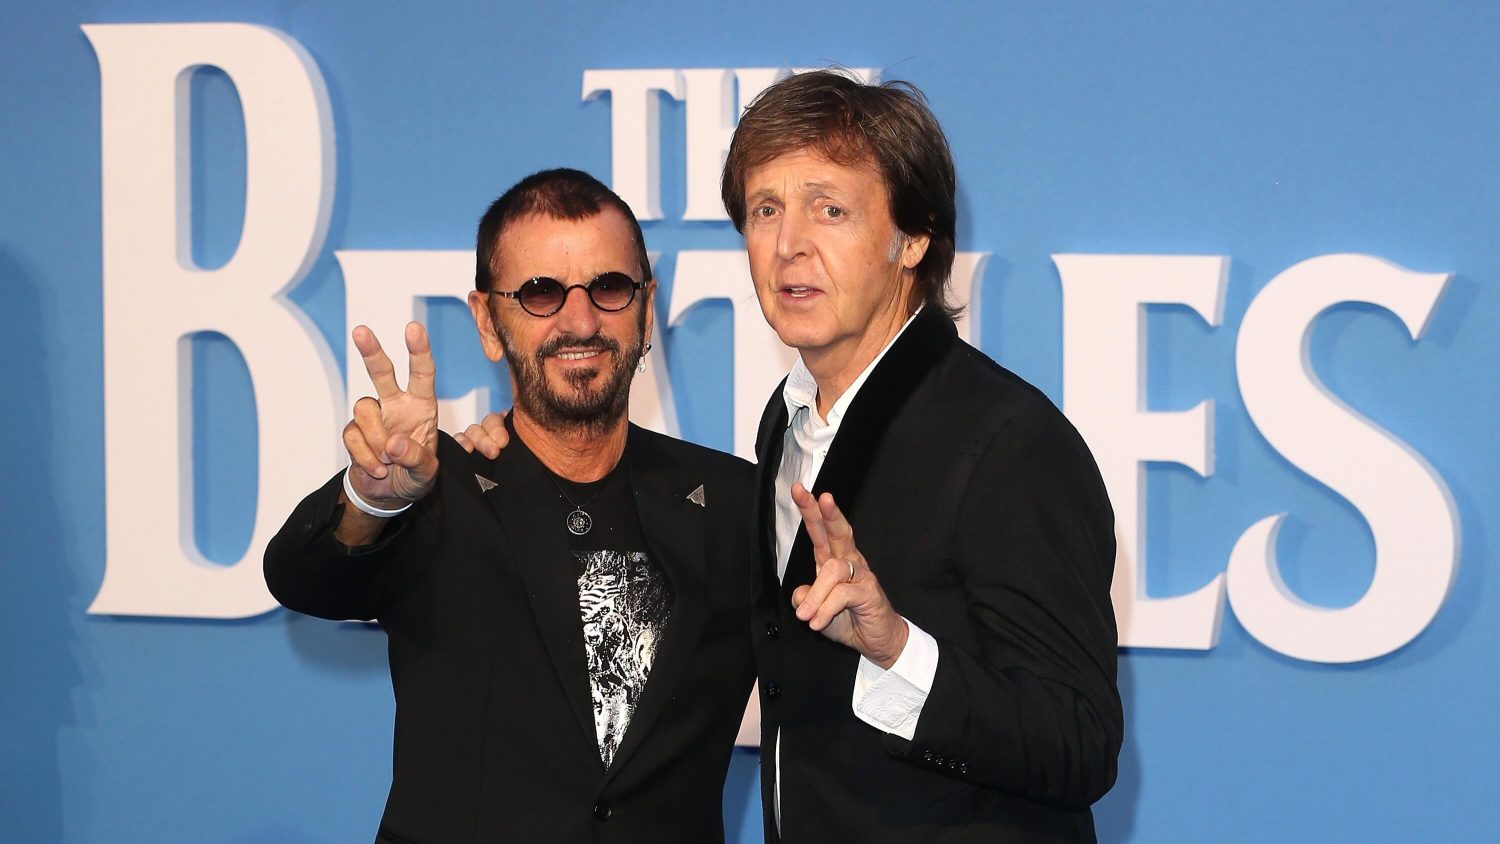 80-Year-Old Ringo Starr Says Broccoli and Blueberries Keep Him Young